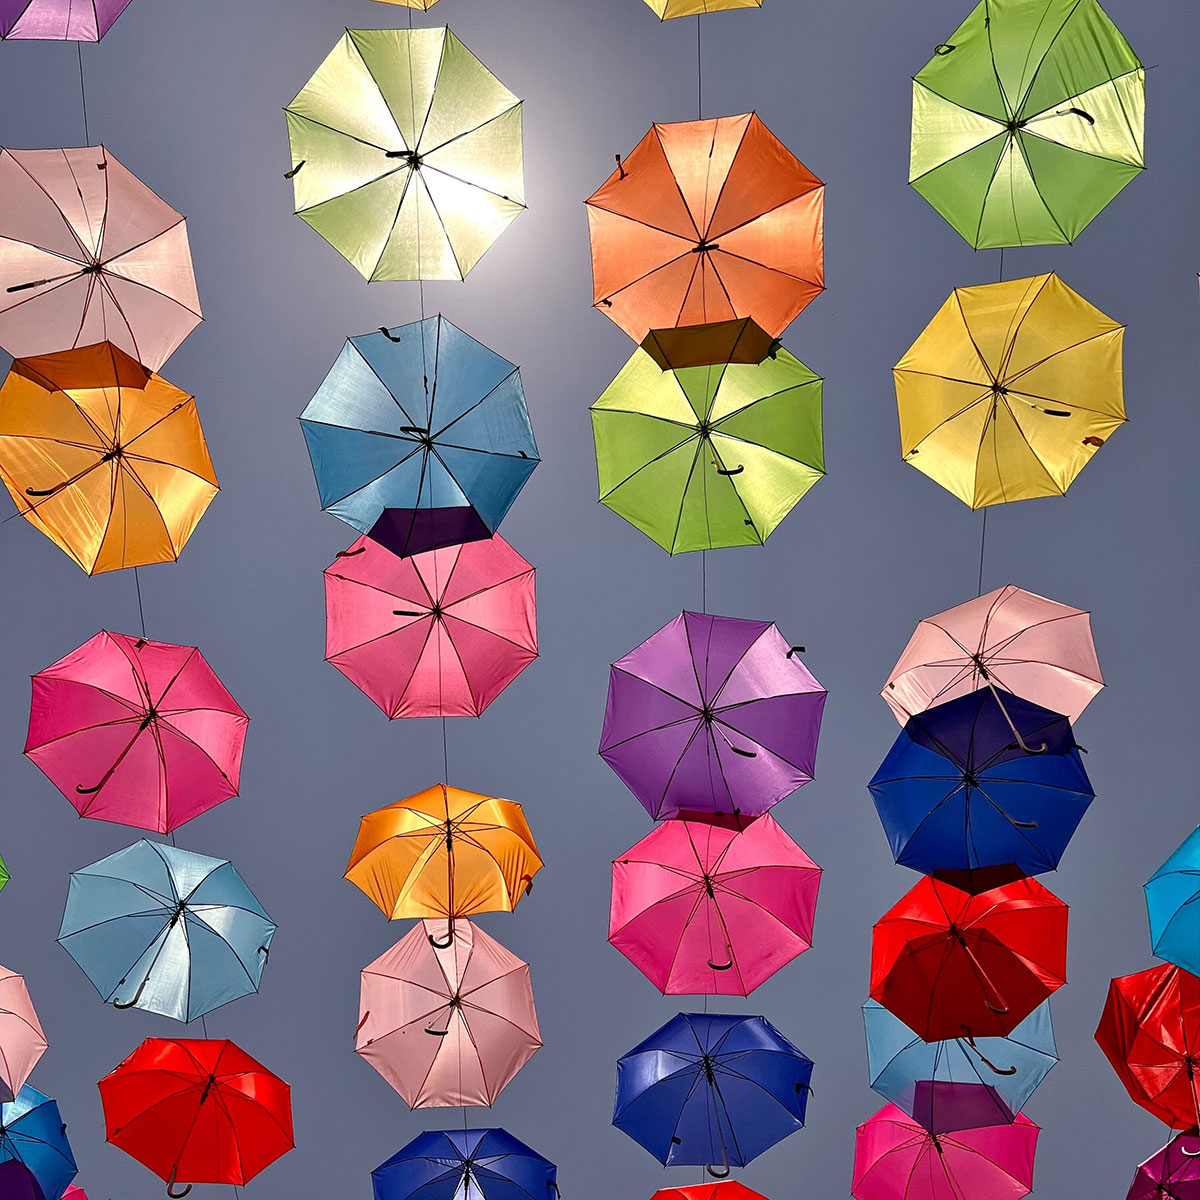 differently colored umbrellas